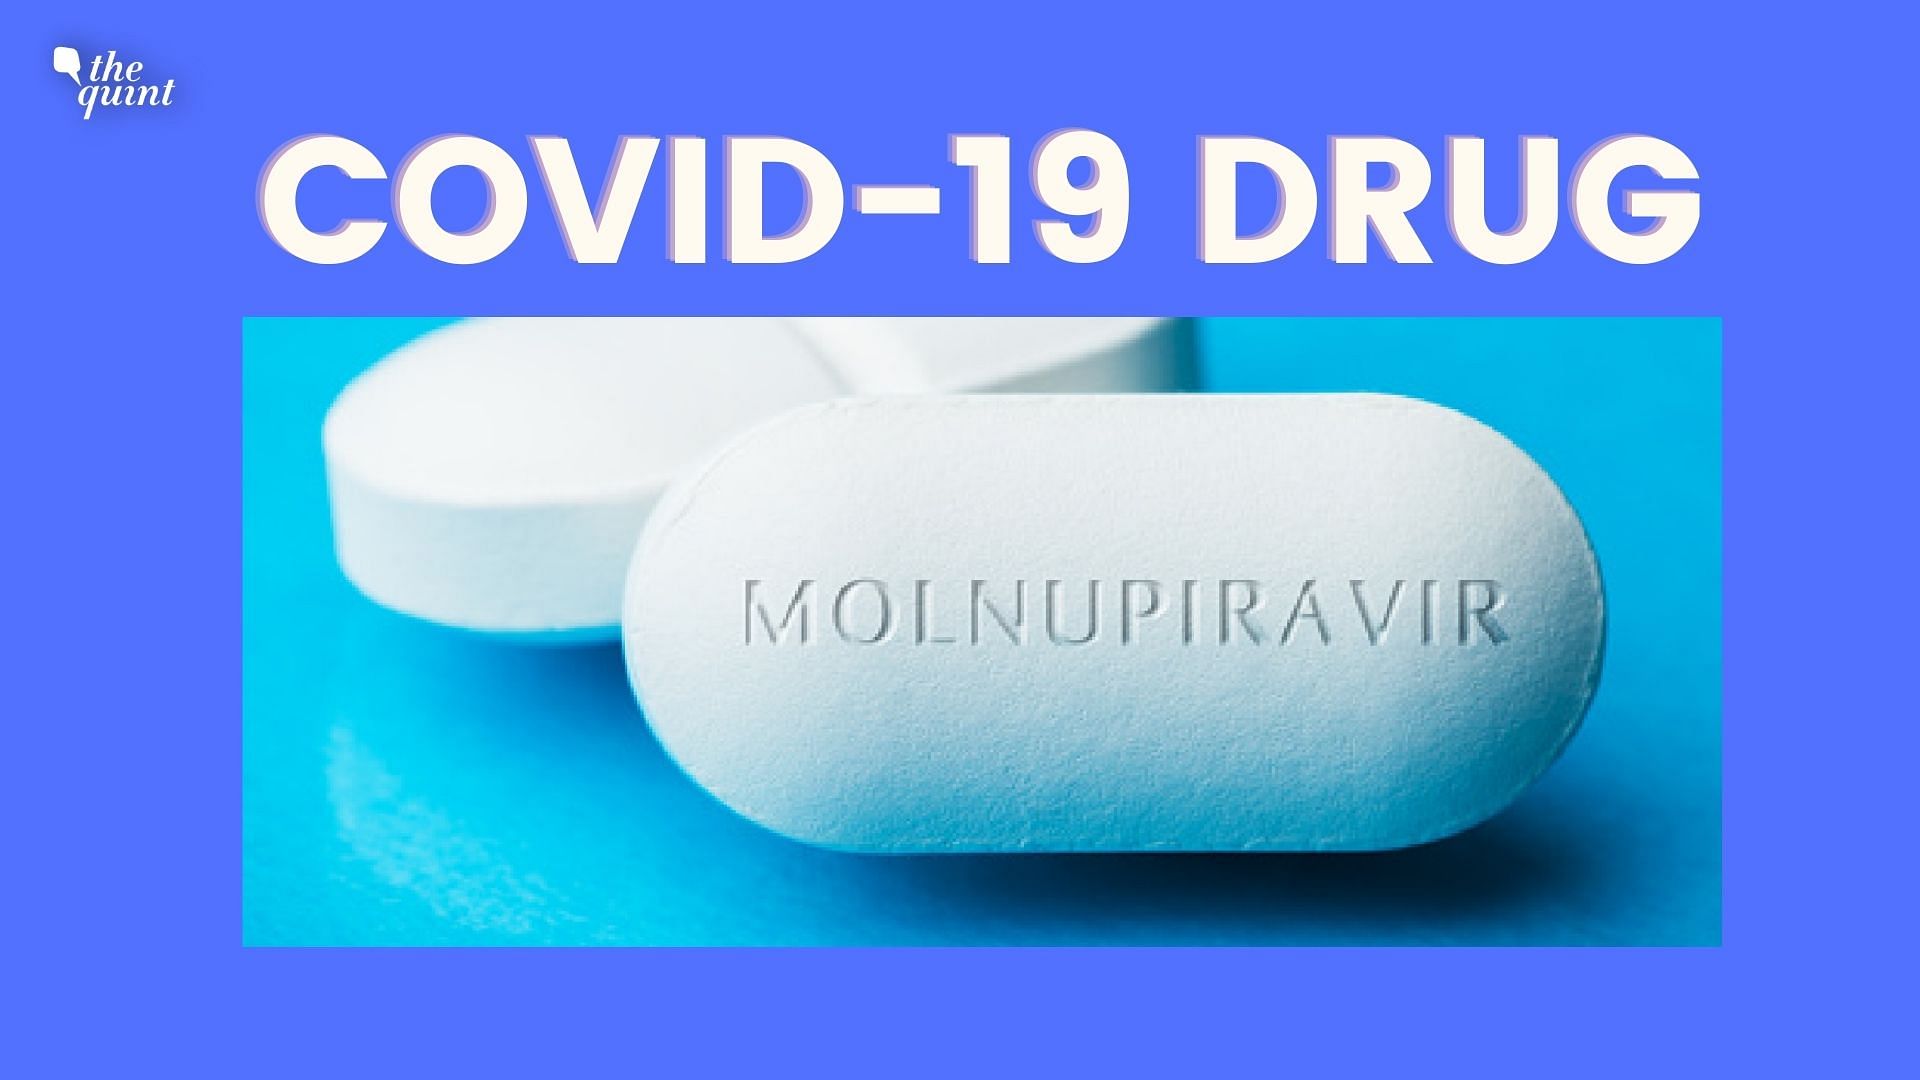 <div class="paragraphs"><p>Cipla Limited announced on Tuesday, 28 December, that it has been granted Emergency Use Authorization (EUA) permission by the Drug Controller General of India (DCGI) for the launch of Molnupiravir, an anti-viral drug to treat mild to moderate COVID-19. Image used for representative purposes.&nbsp;</p></div>